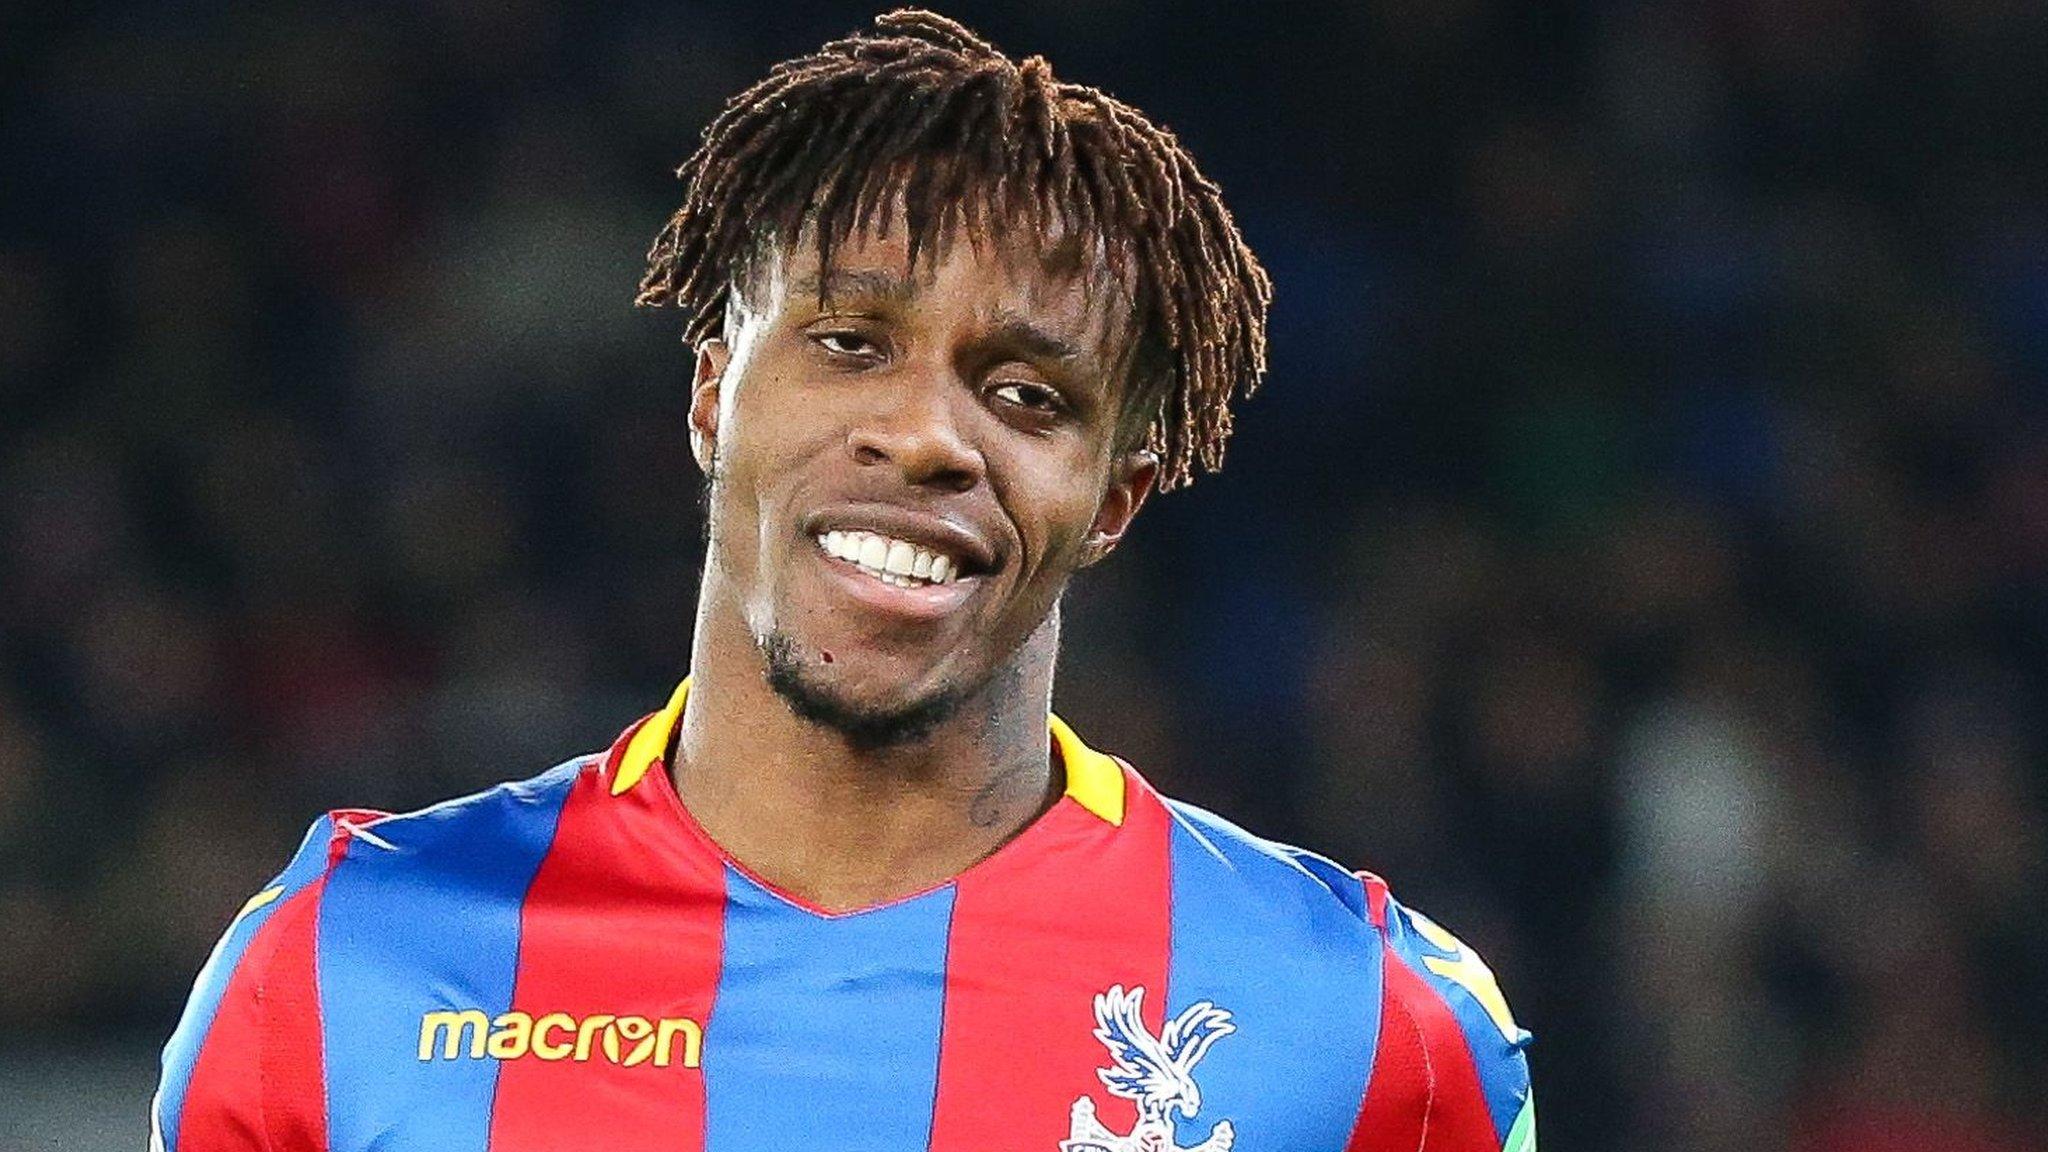 Wilfried Zaha will not leave Crystal Palace in January, says manager